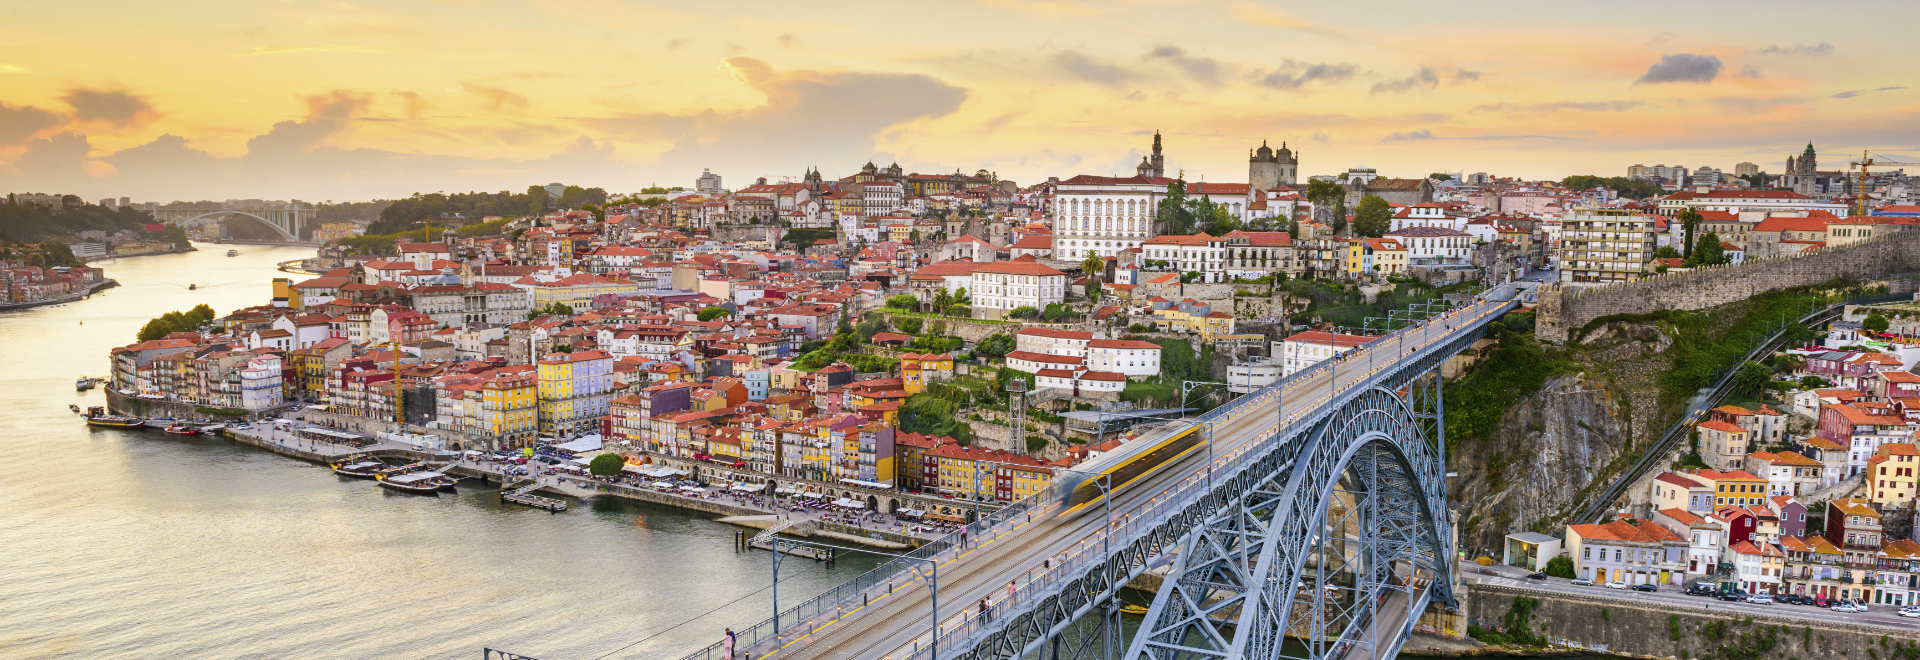 Portugal is the new cool country, claims Spanish newspaper